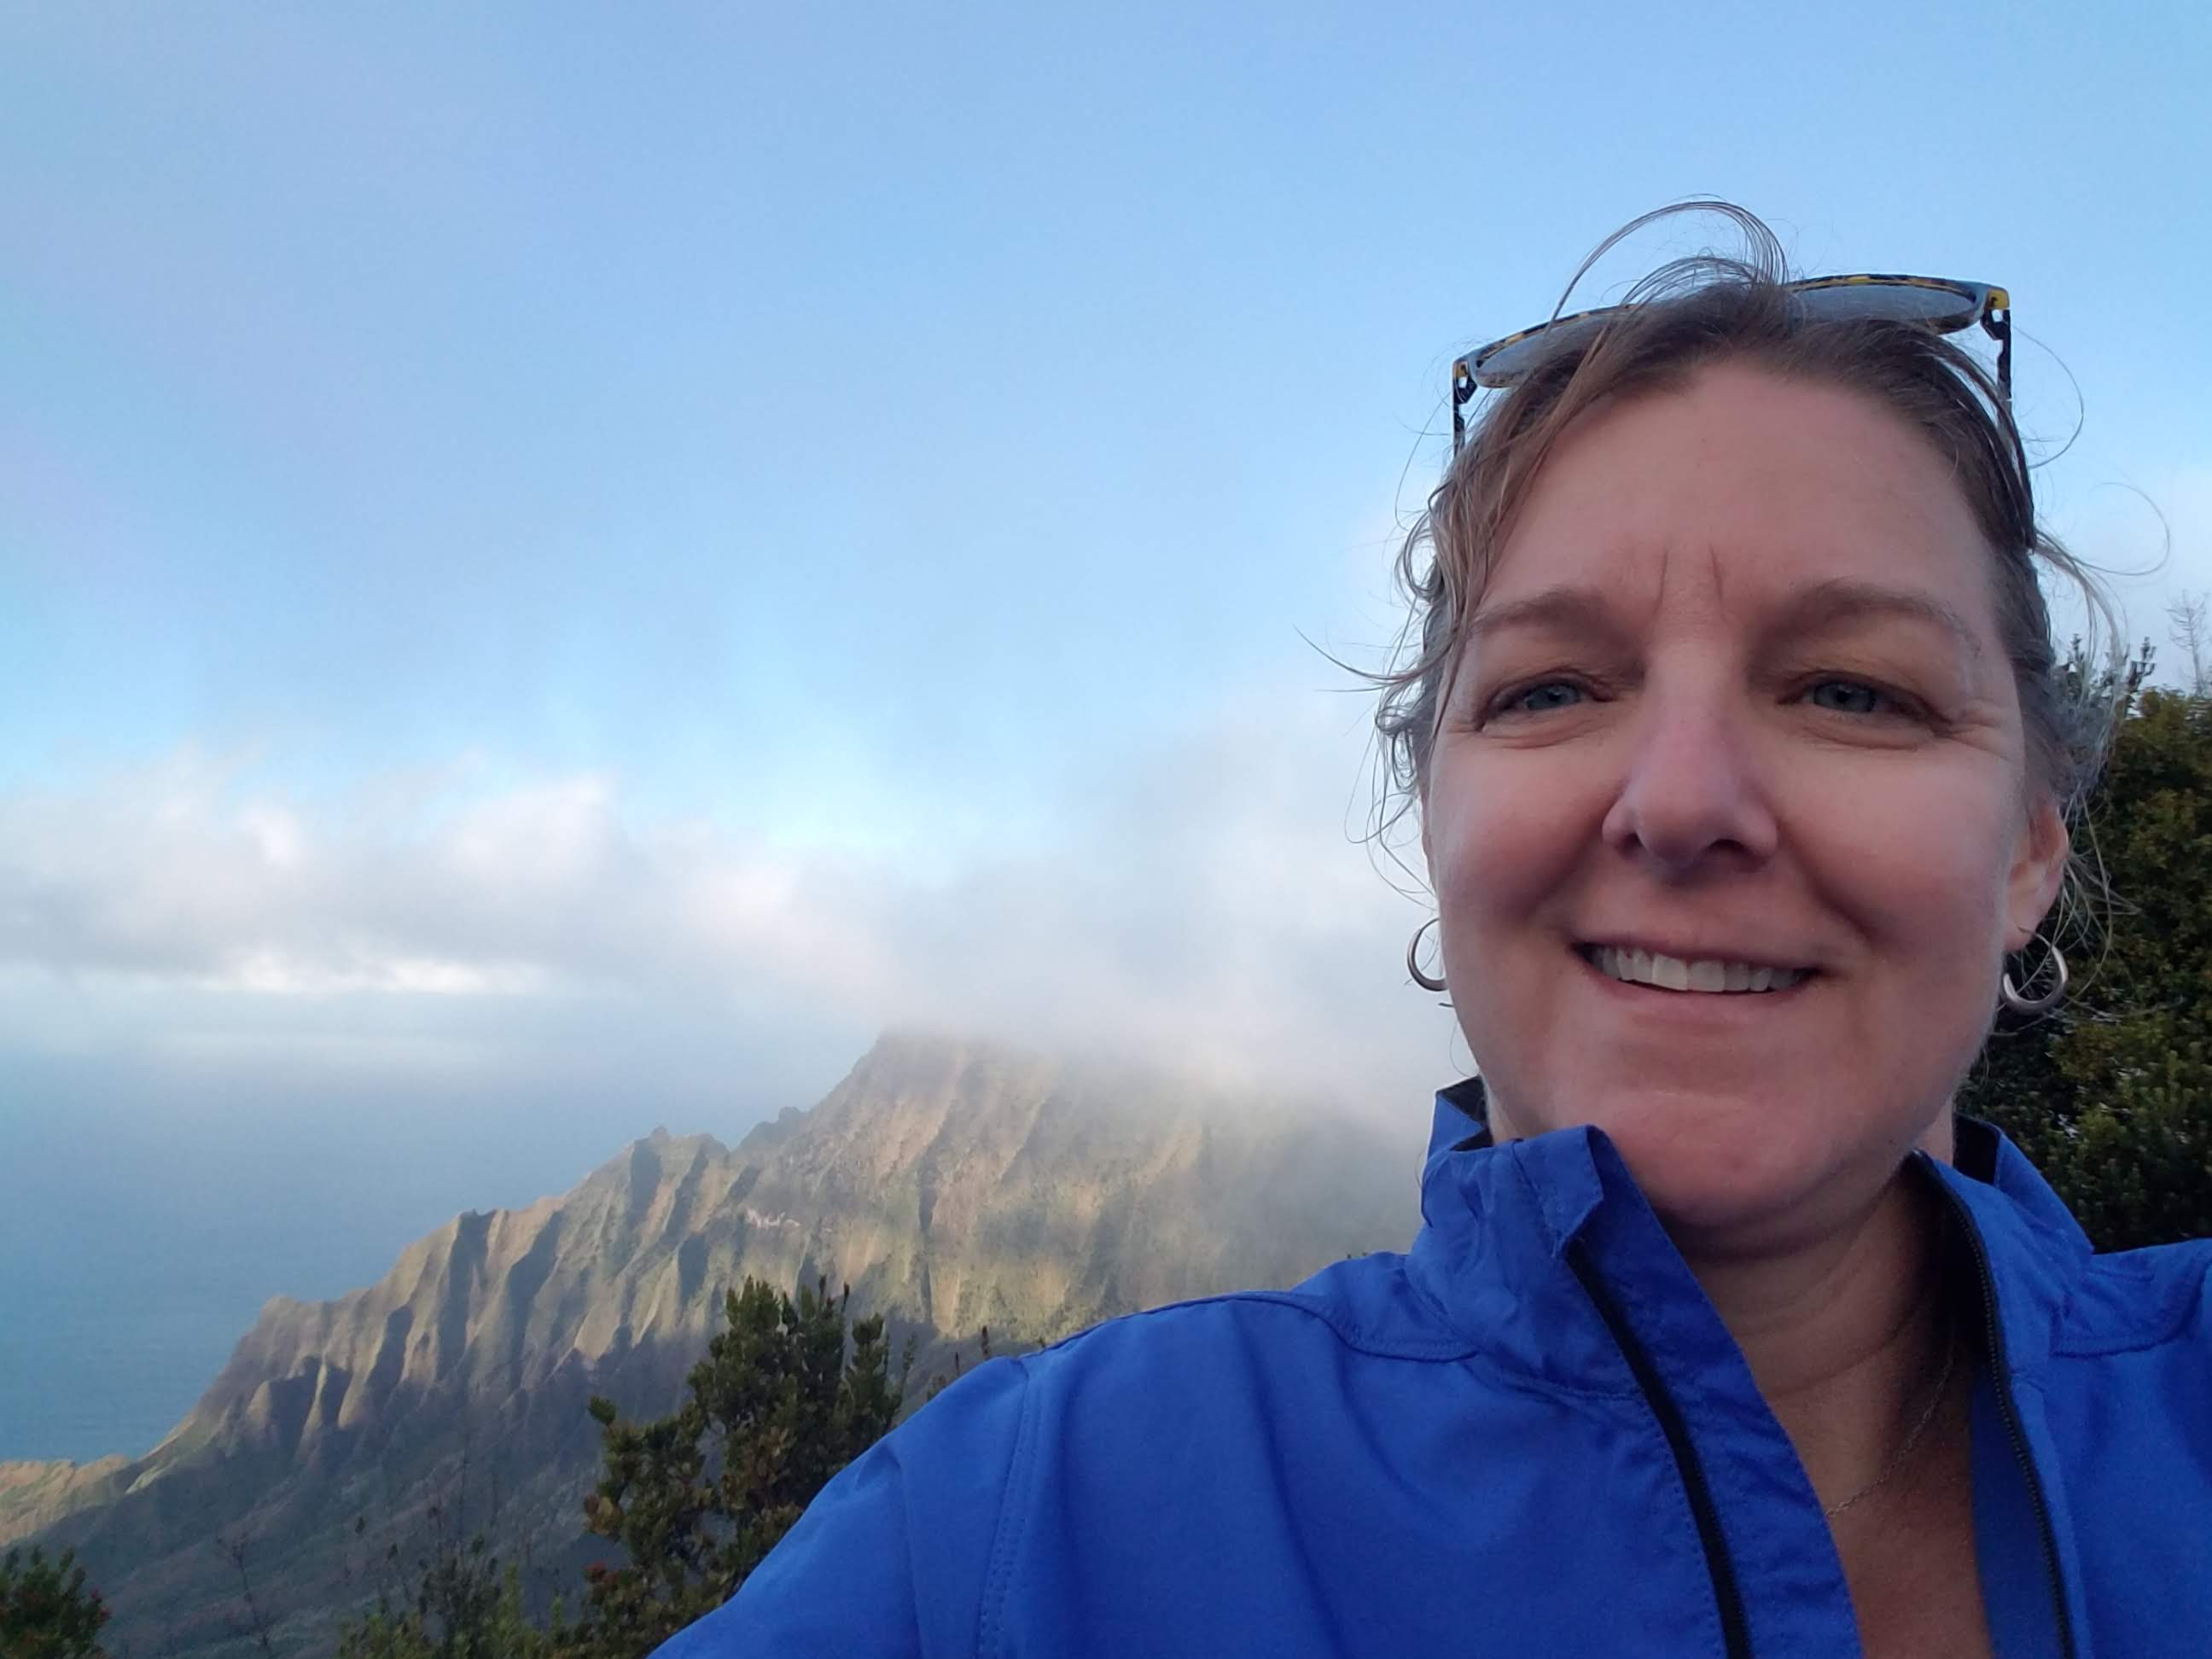 WWU Outstanding Grad Theressa Porcarelli Carey smiling with mountainside and clouds in the background